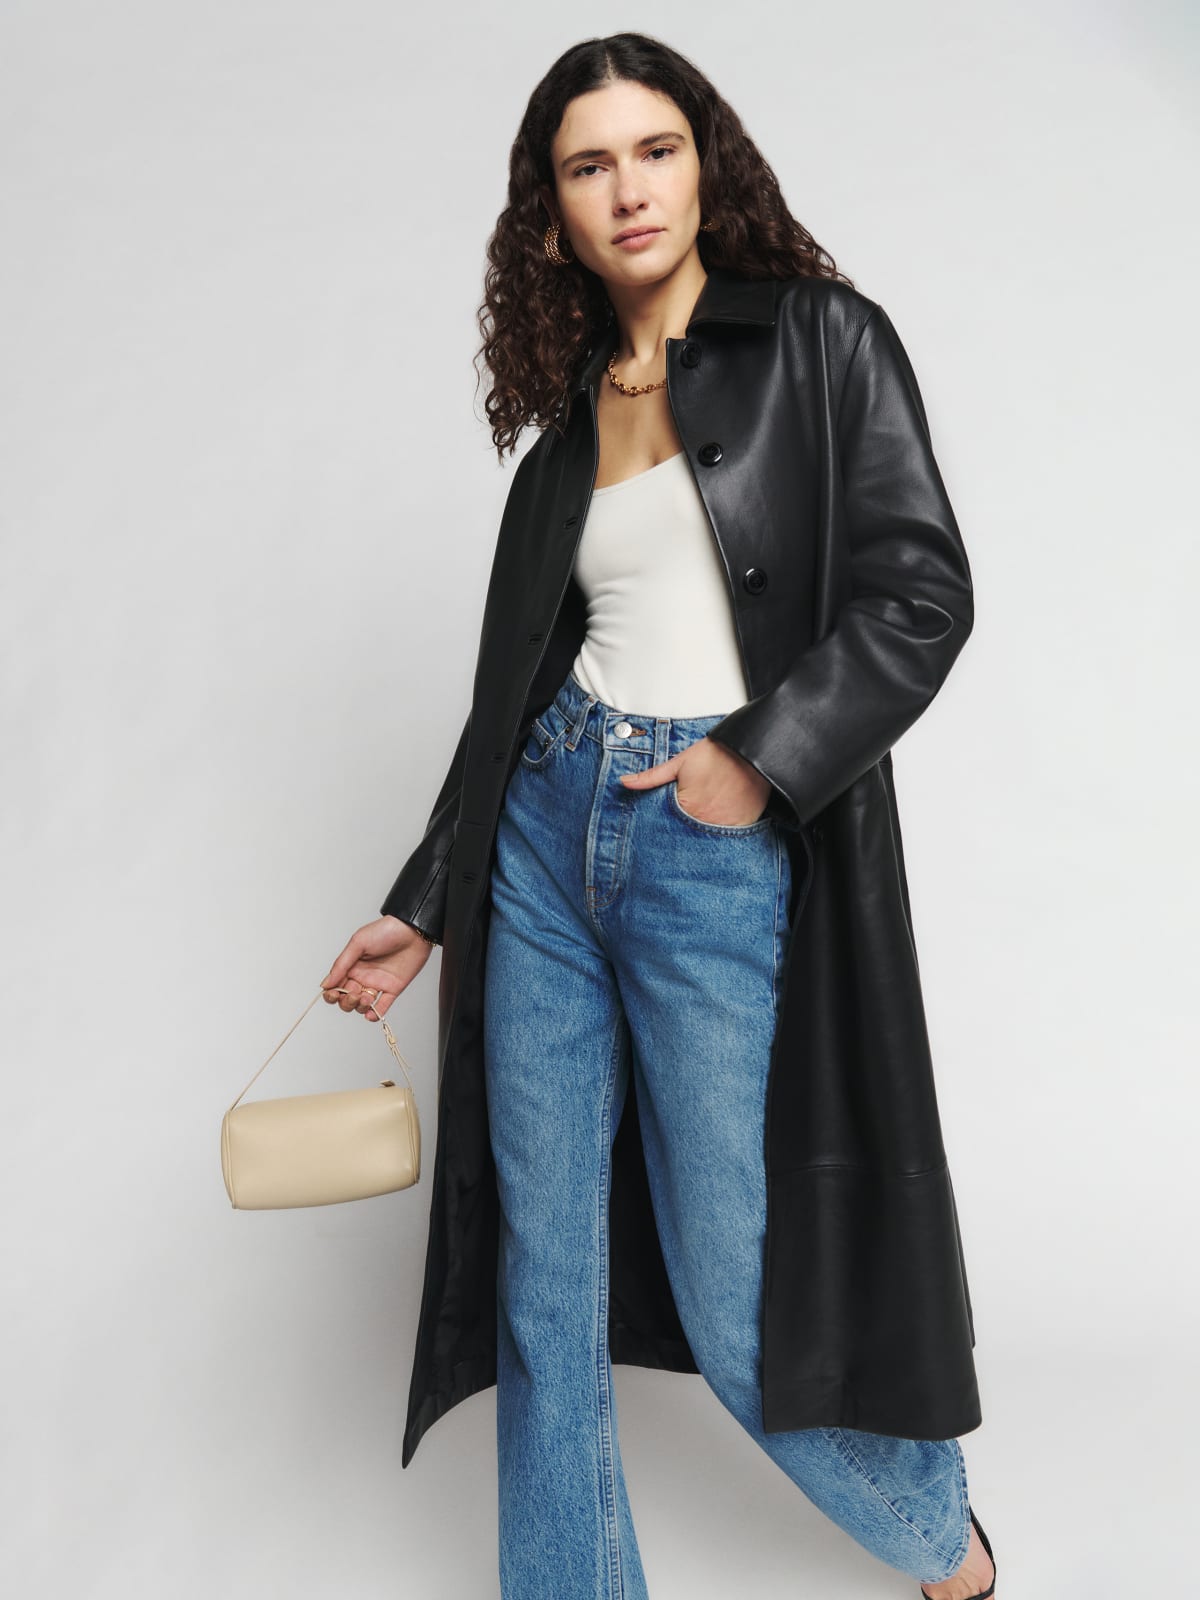 The Reformation Veda leather coat is a black full-length, slim-fit, single-breasted coat. It has functional center-front buttons, so you can wear it both open and closed.